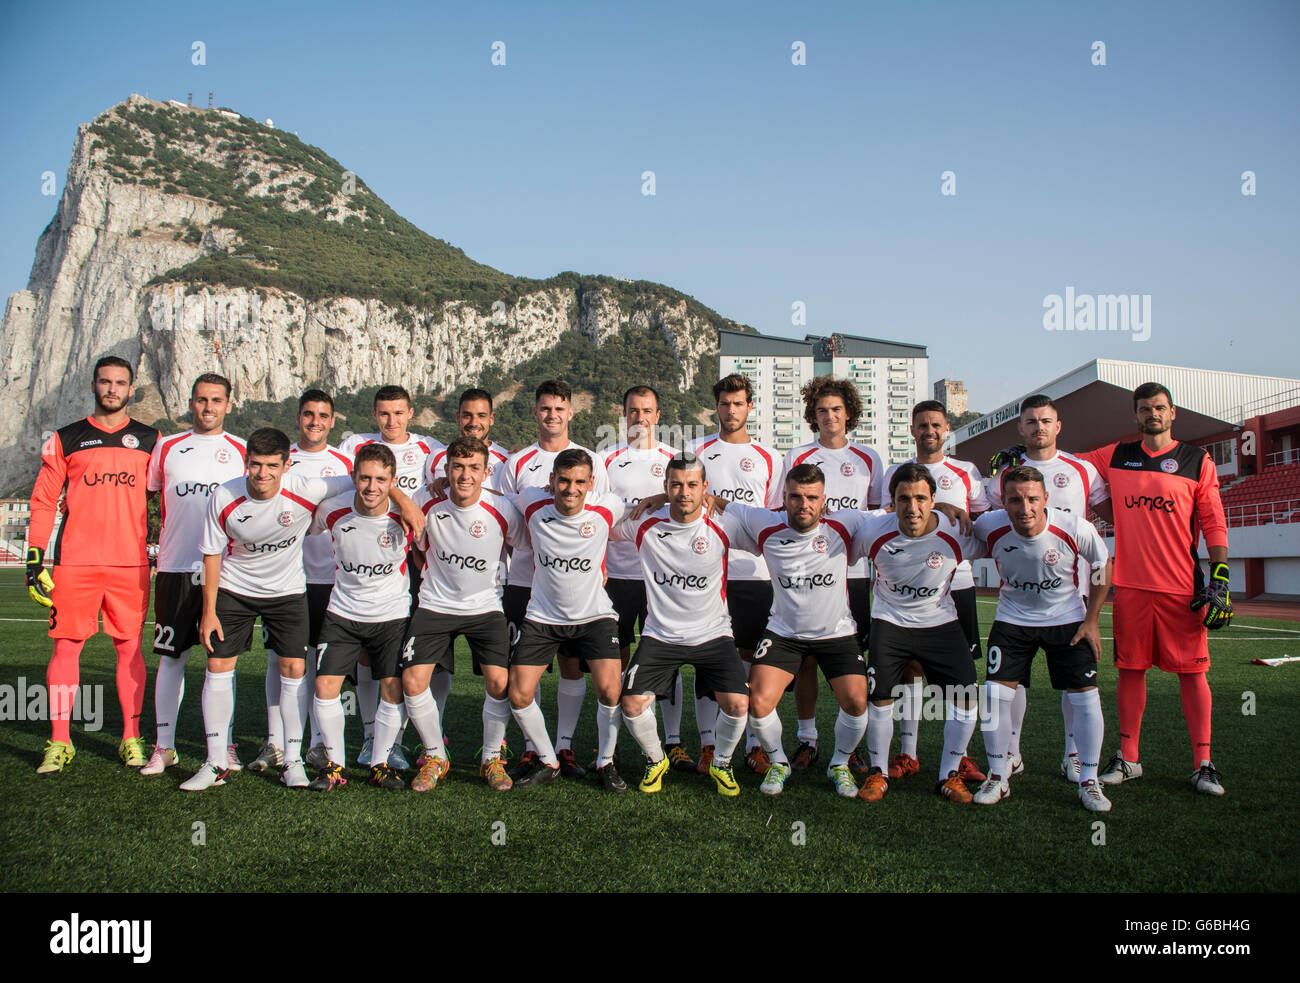 Gibraltar - 24th June 2016 - Pictured the full squad of Gibraltar's 2015/16 league champions Lincoln Red Imps FC who will be travelling to Estonia this weekend to play against Flora Tallinn (EST) in the first round qualifying first leg match of the UEFA Champions League on Tuesday 28th June 2016. Pictured with the latest squad at the Victoria Stadium with the Rock of Gibraltar in the background.Lincoln REd Imps are wearing their new stripe after signing up a new sponsor. Credit:  Stephen Ignacio/Alamy Live News Stock Photo